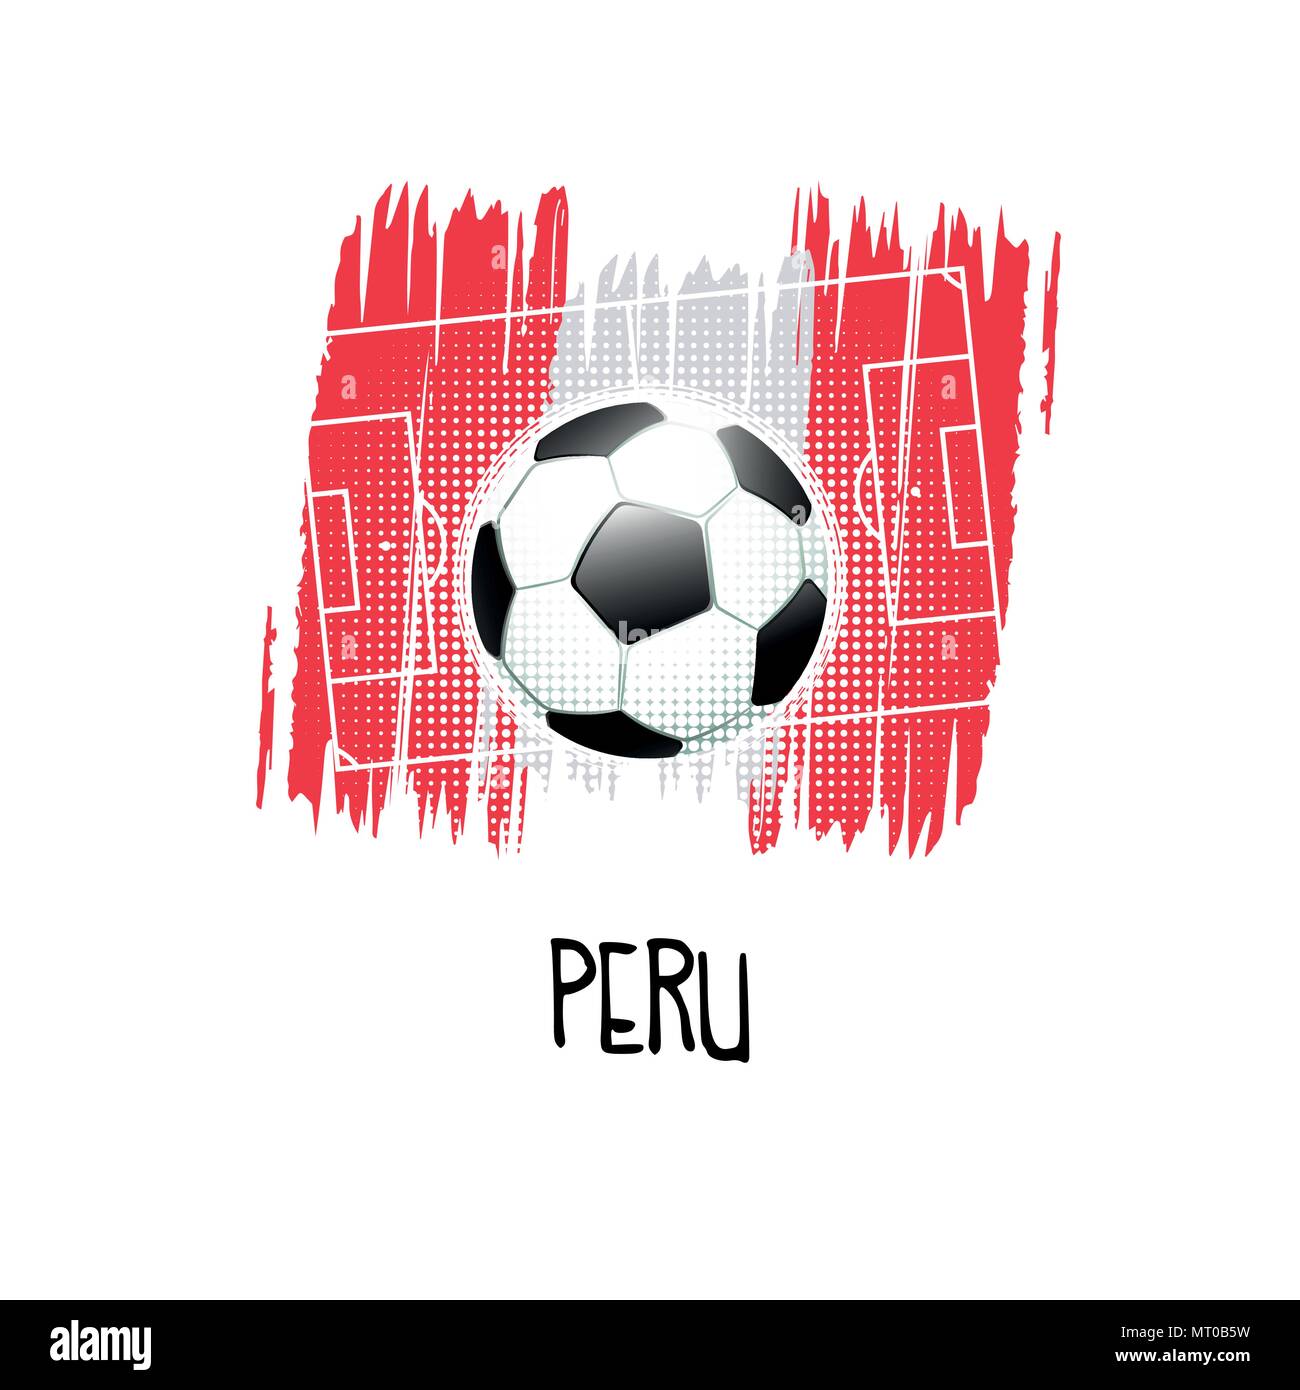 Hand written word 'Peru' with soccer ball, soccer field and abstract colors of the Peruvian flag. Vector illustration. Stock Vector